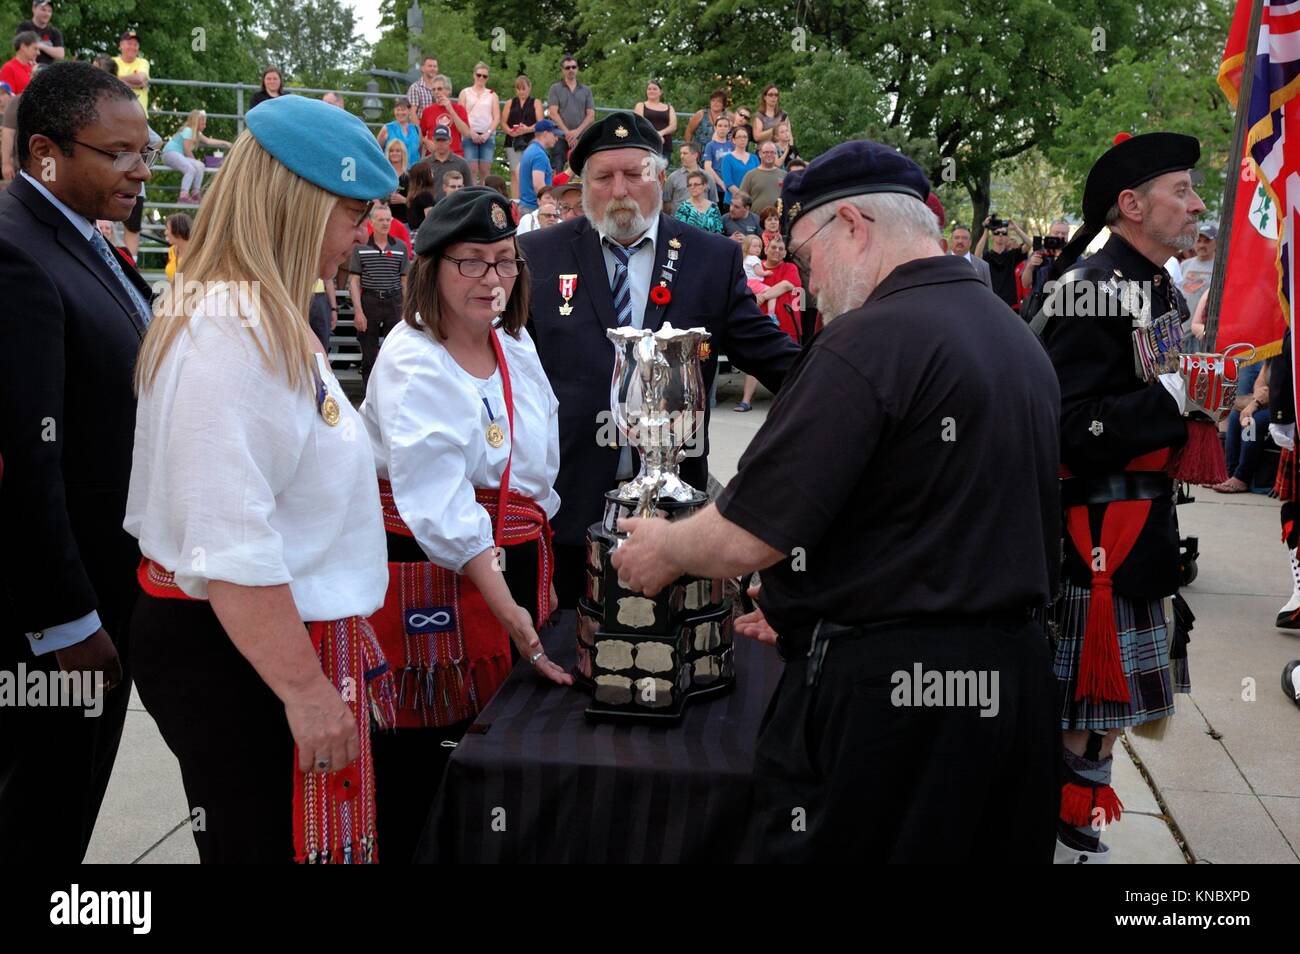 A group of military men and women lift the Memorial Cup and prepare to take it inside Windsor City Hall. The outdoor remembrance ceremony is part of Stock Photo